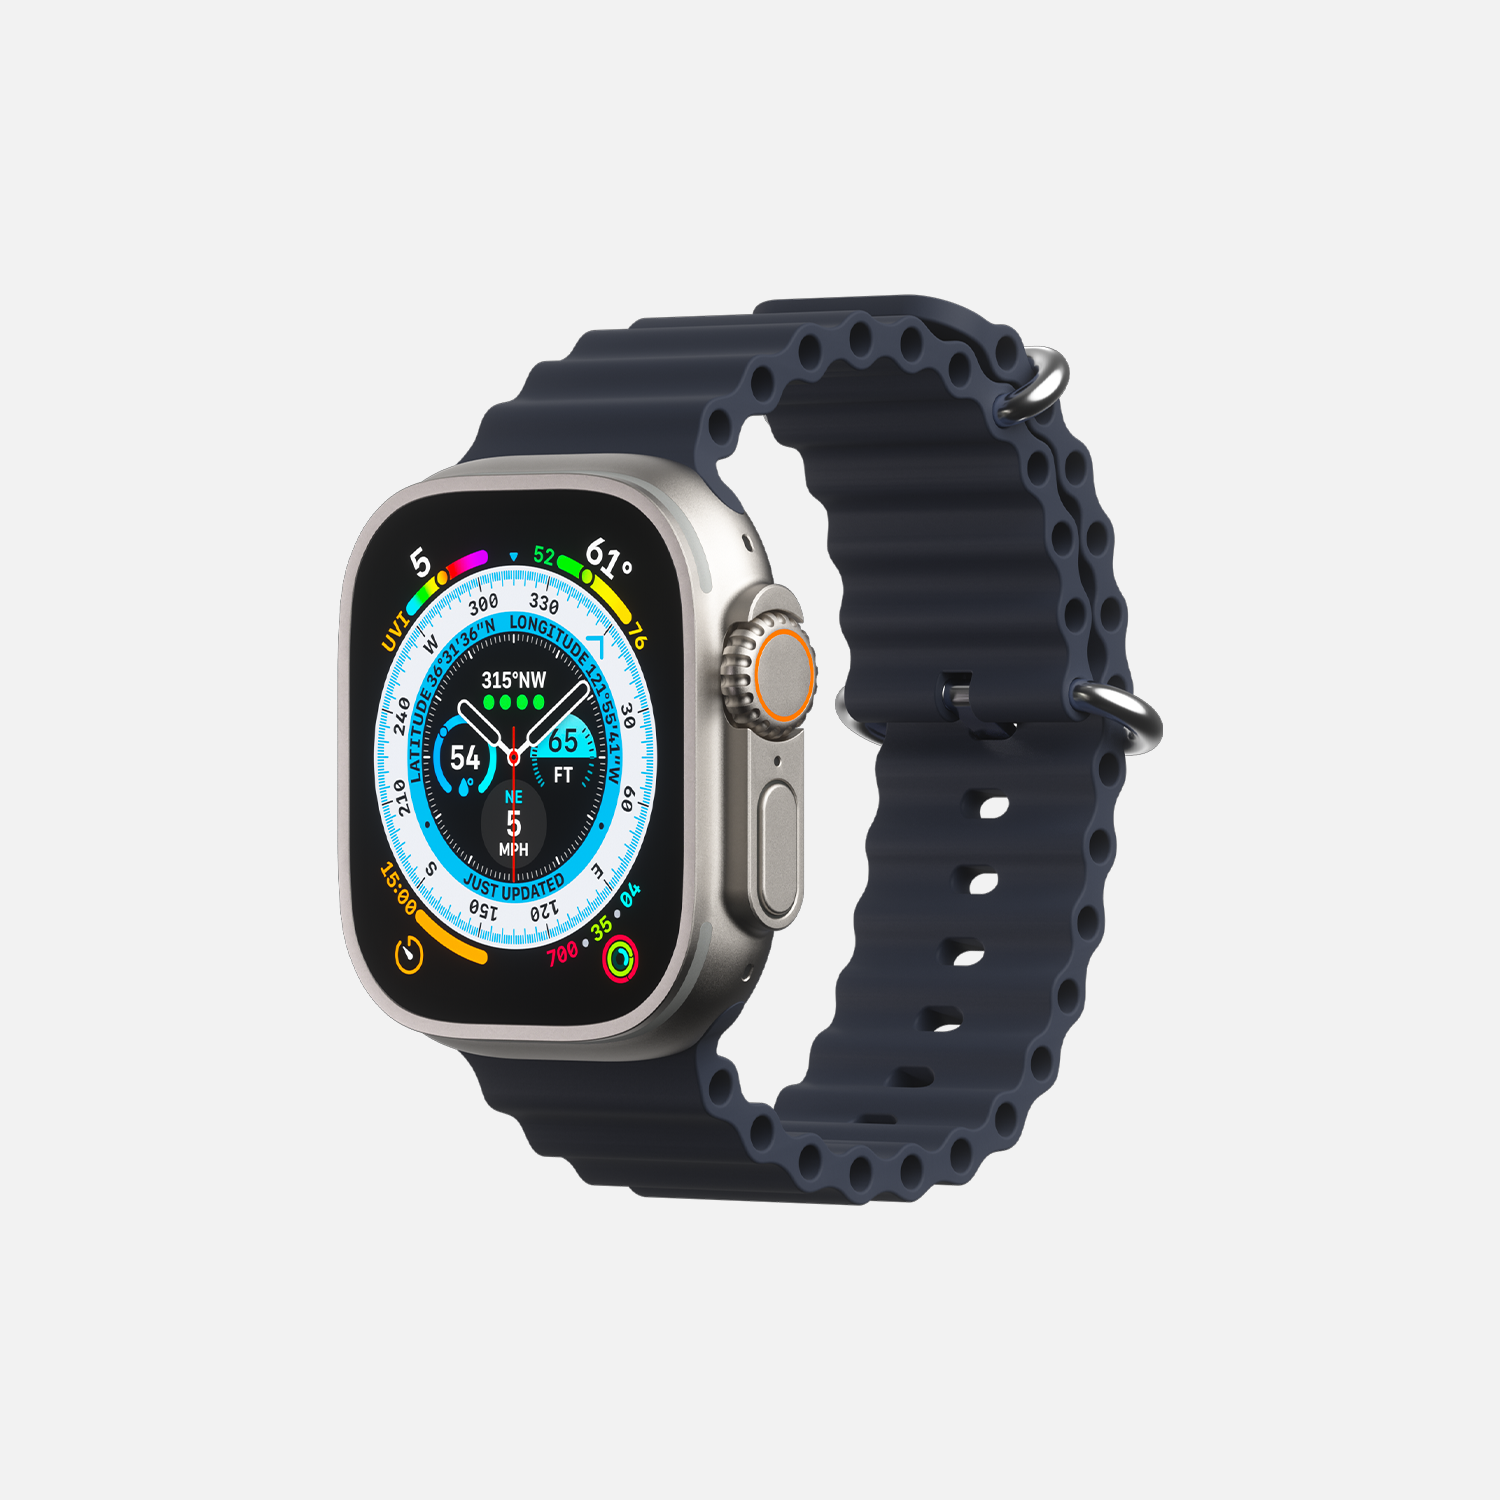 Apple Smartwatch with black sports band and colorful display showcasing fitness tracking features.